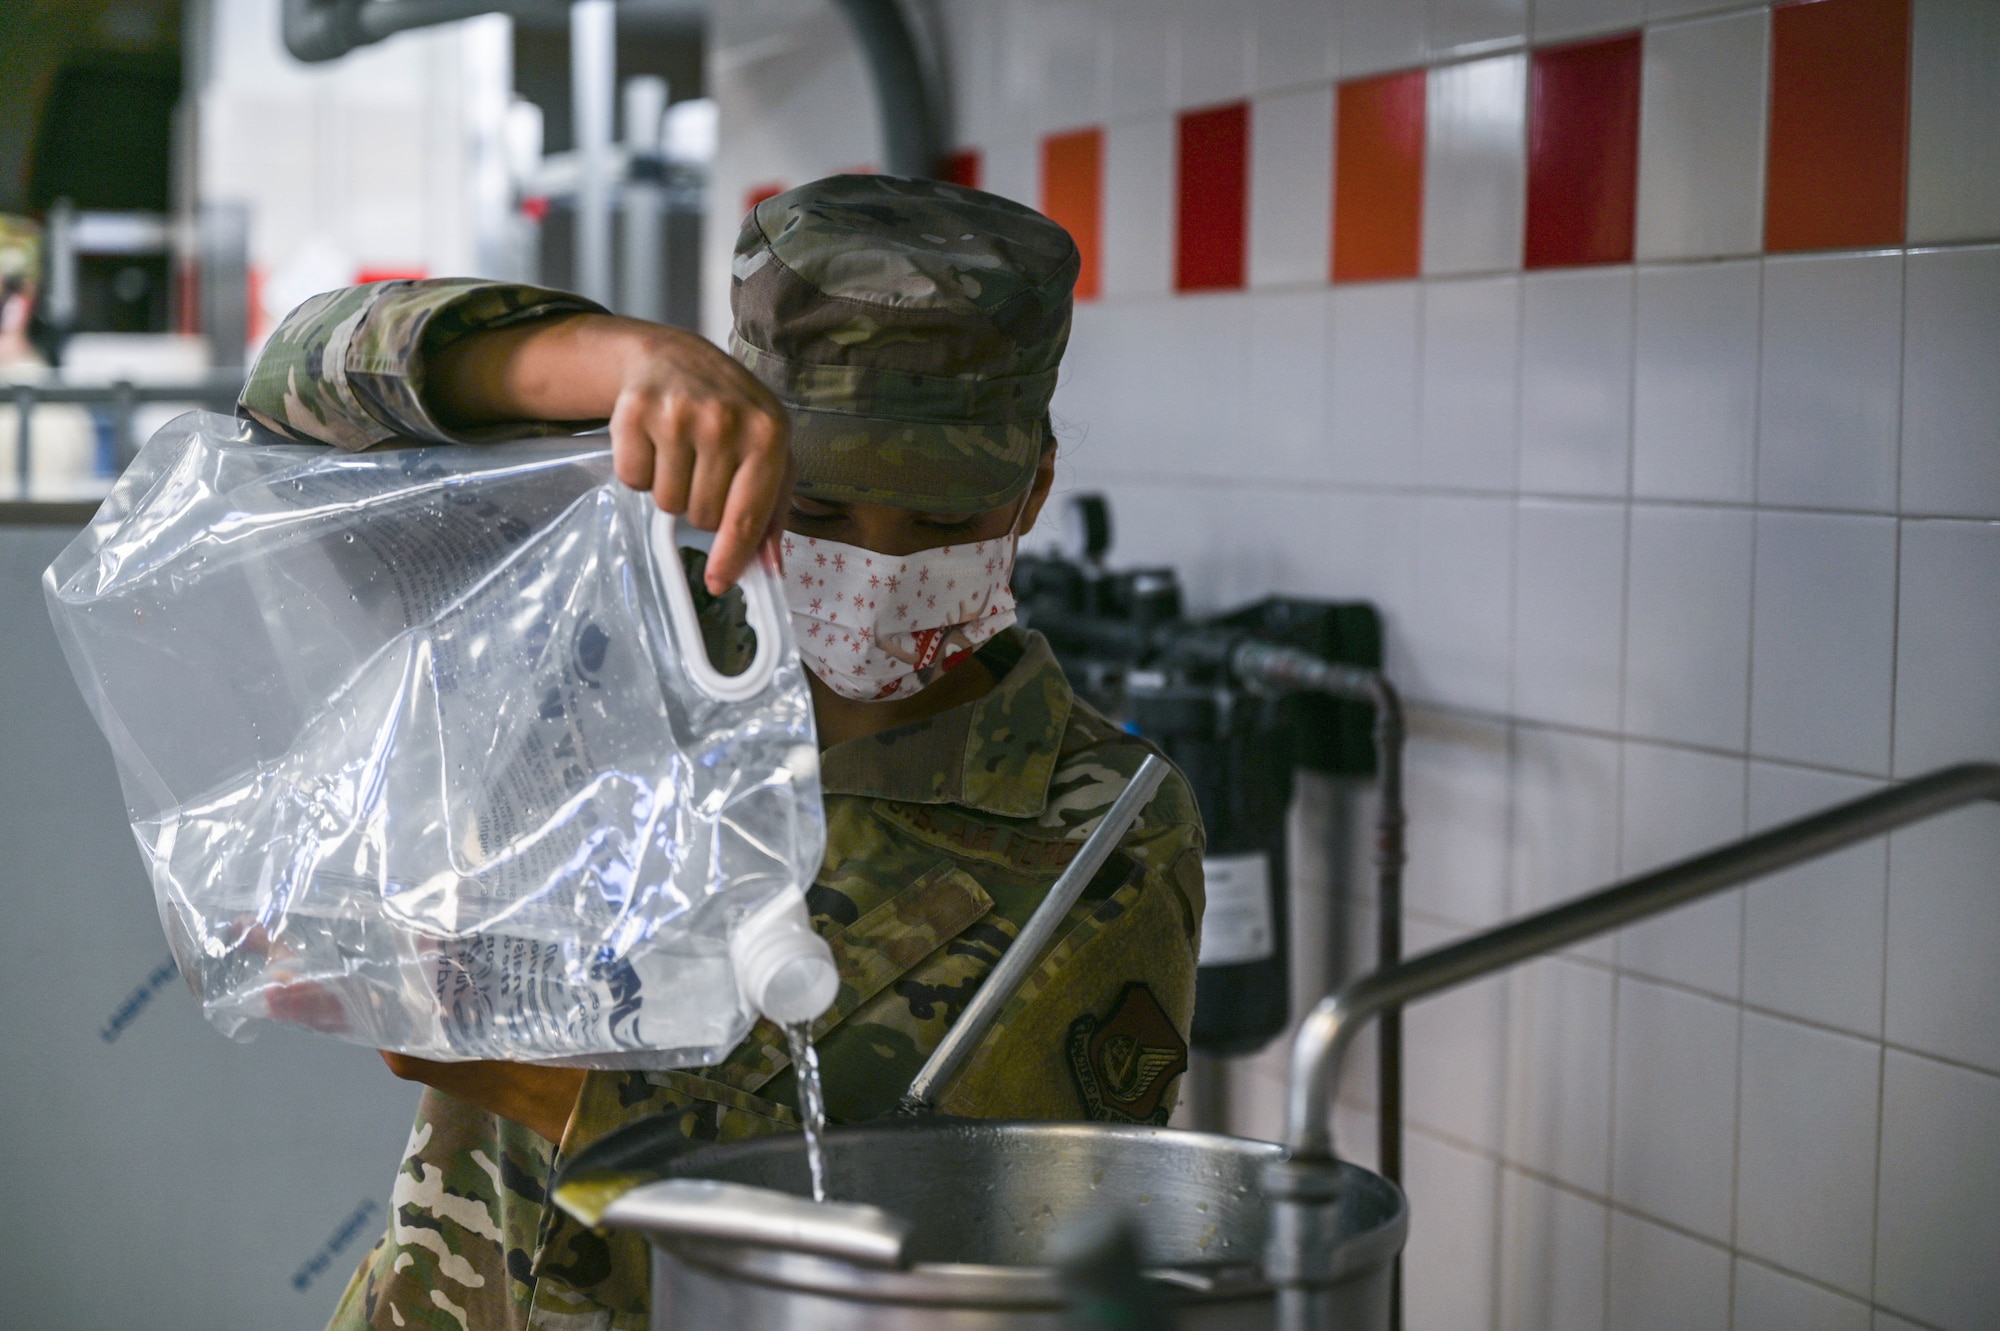 Staff Sgt. Sarah Sanez, 647th Force Support Squadron food service supervisor, utilizes water from a potable source to clean cooking equipment in the Hale Aina Dining Facility at Joint Base Pearl Harbor-Hickam, Hawaii, Dec. 16, 2021. The Hale Aina staff are providing food made with potable water as a precautionary measure. The facility uses up to 80 gallons of potable water per day and is one of 17 locations regularly screened for contaminants on the Hickam side of JBPHH. (U.S. Air Force photo by Staff Sgt. Alan Ricker)